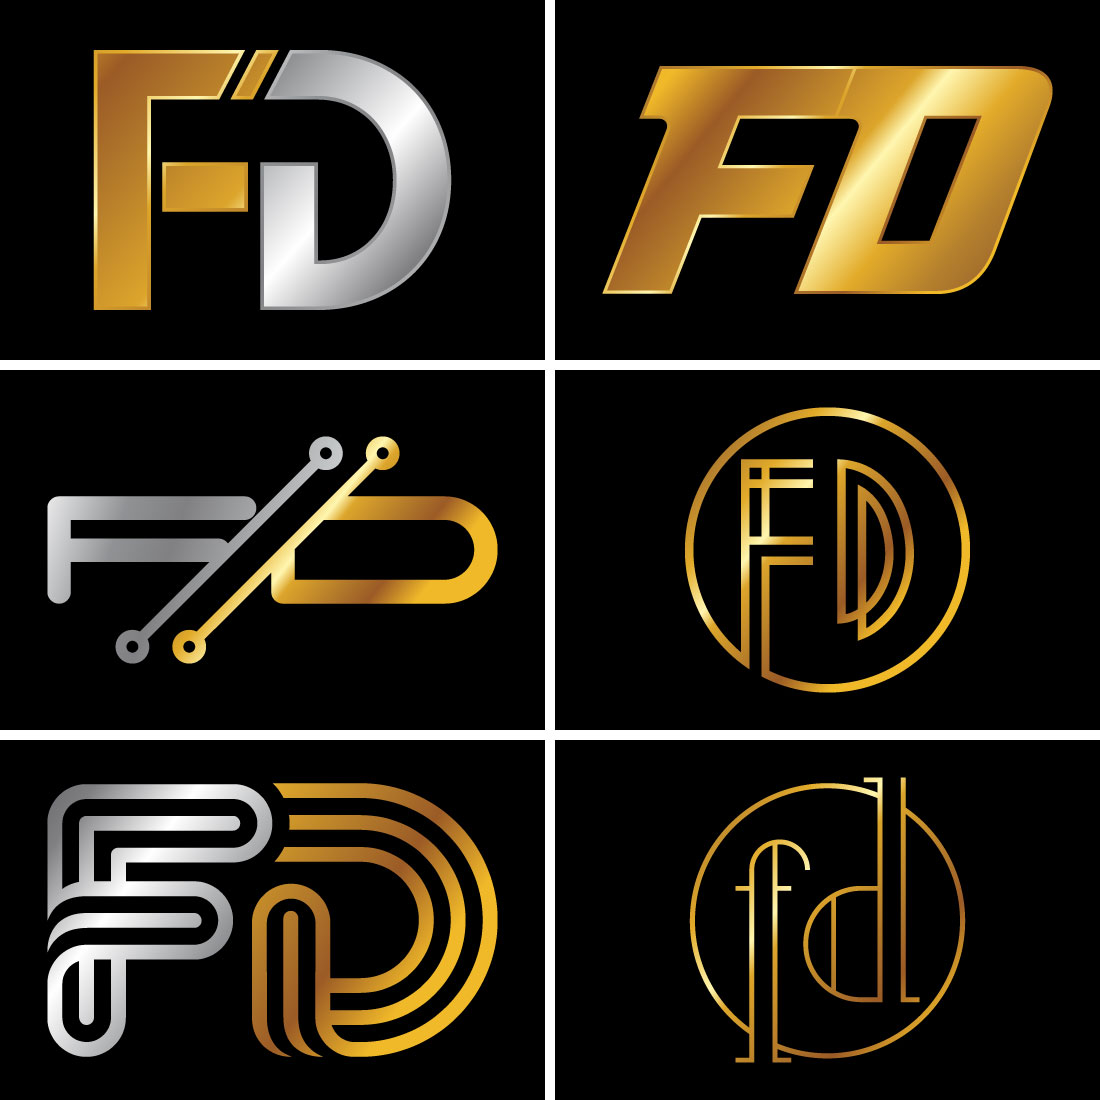 Initial Letter F D Logo Design Vector Template main cover